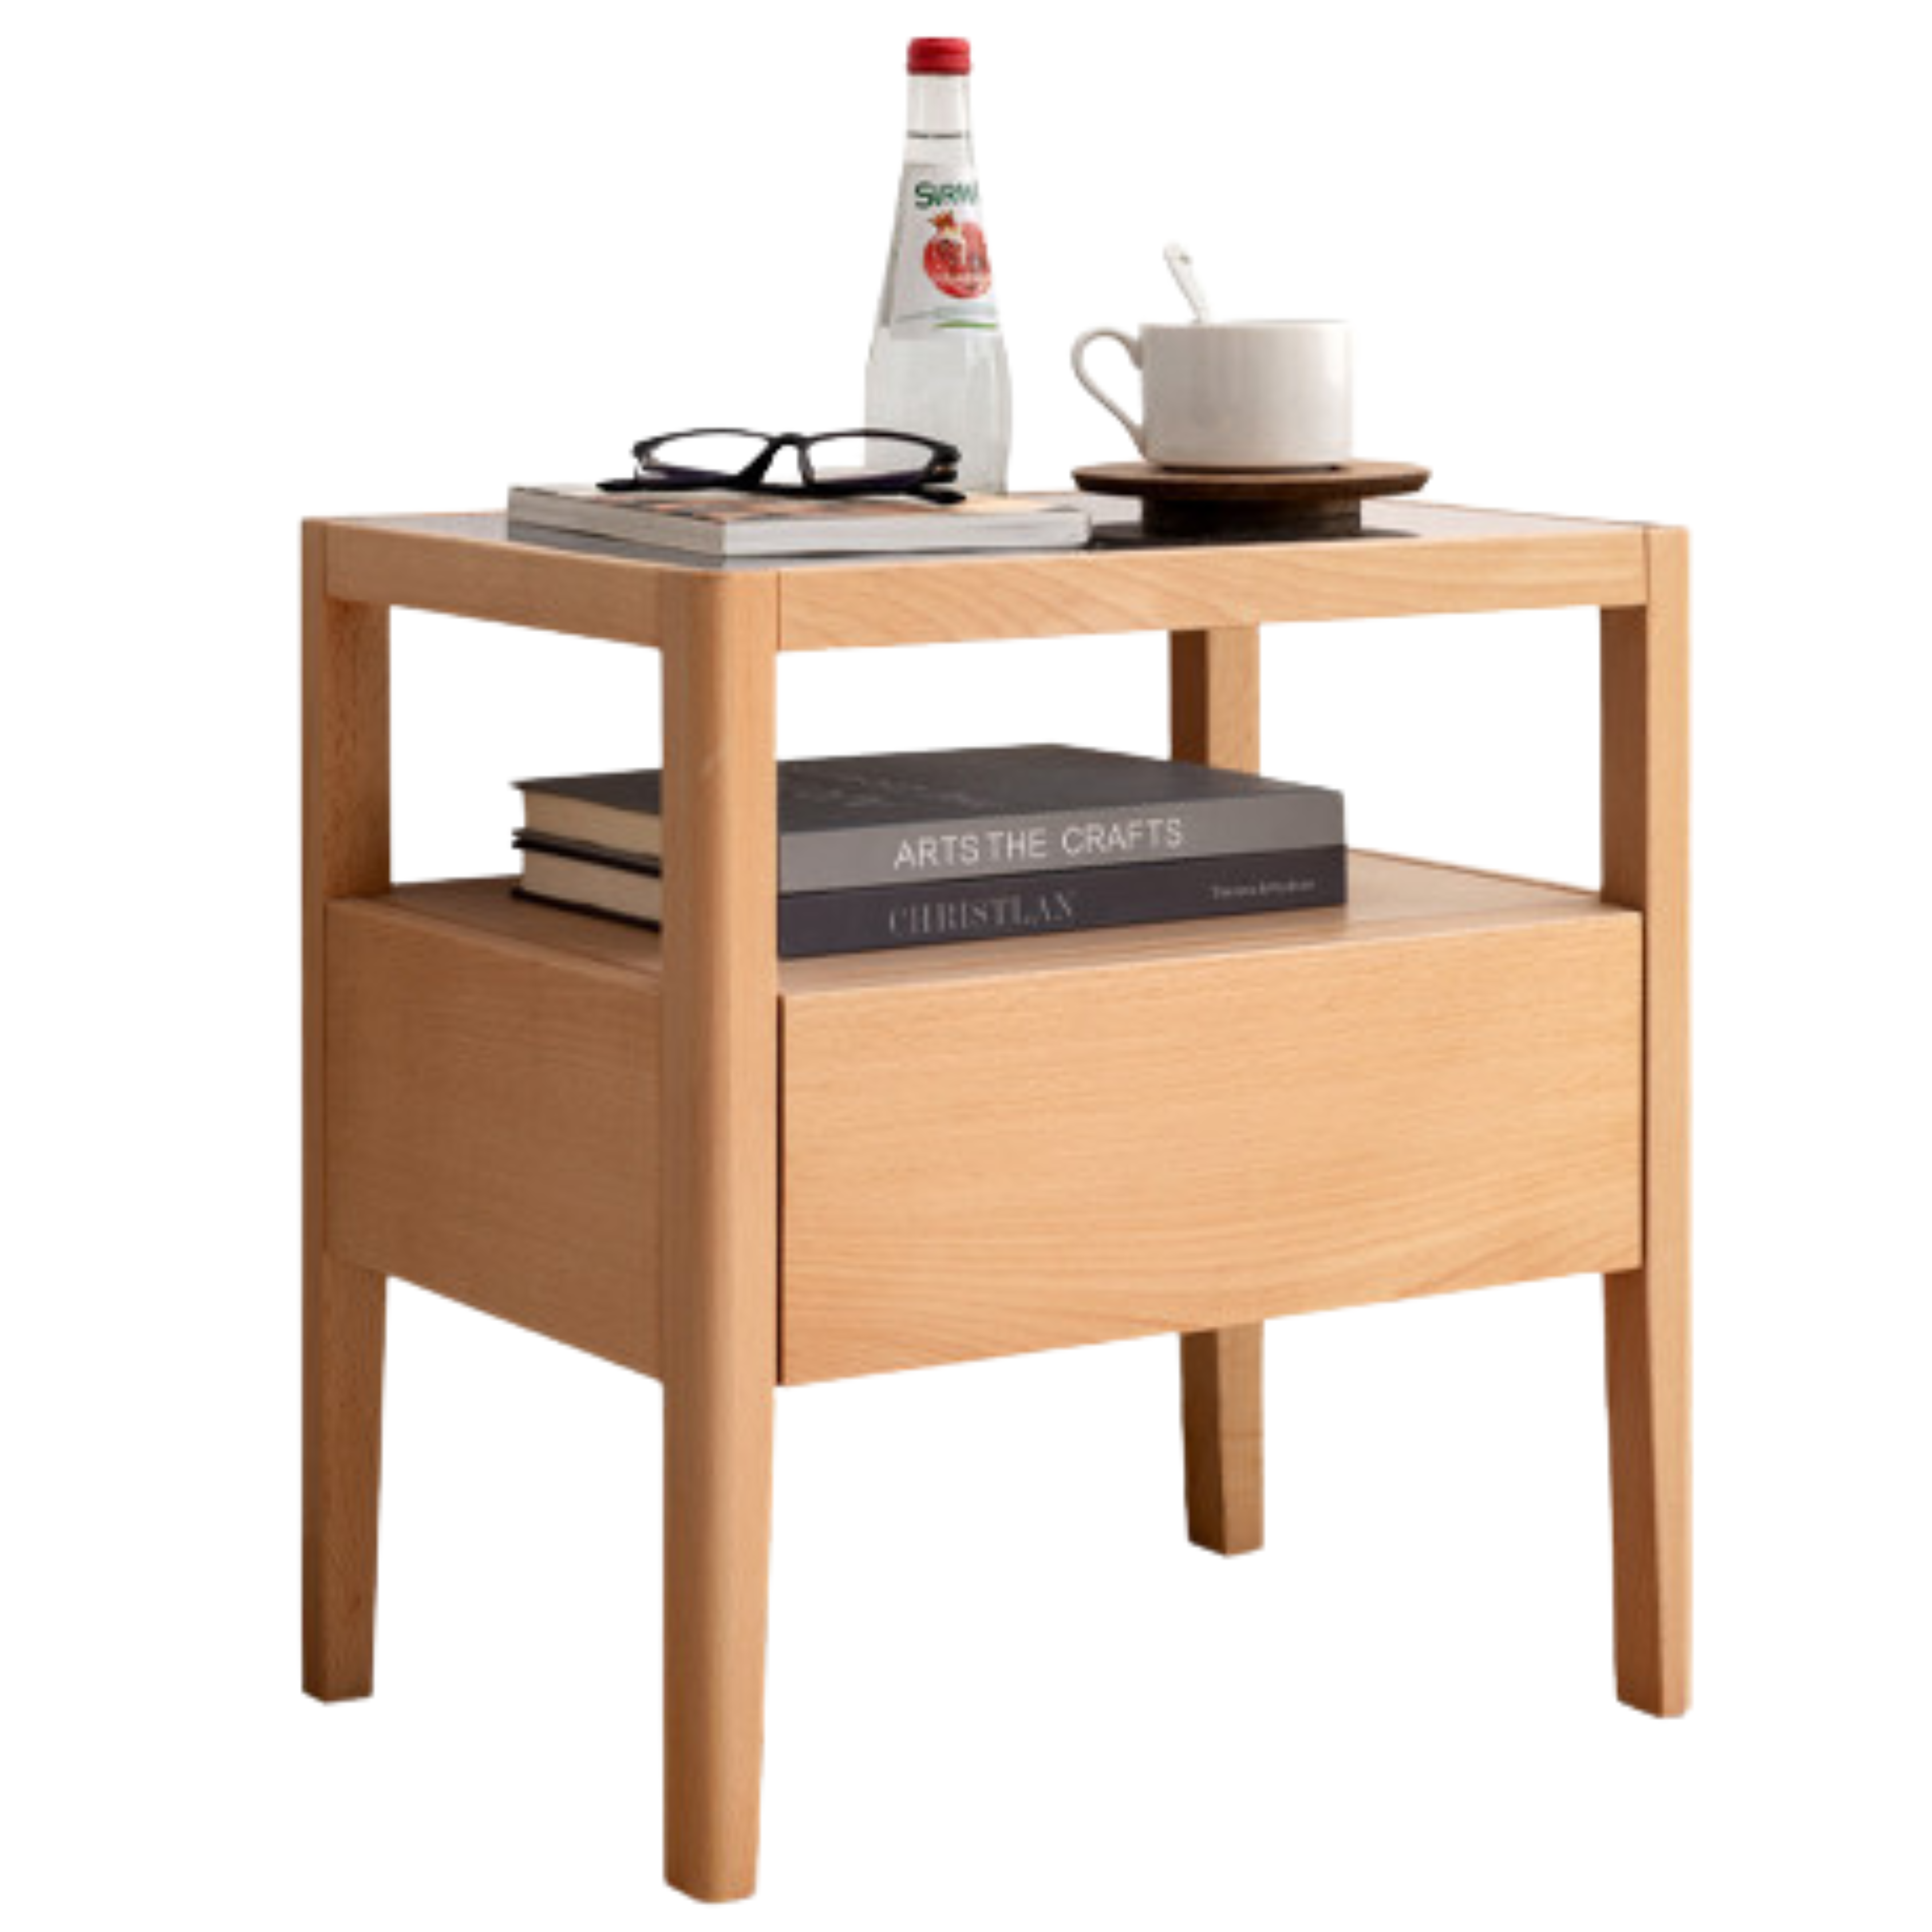 Beech solid wood bedside storage, small side table)